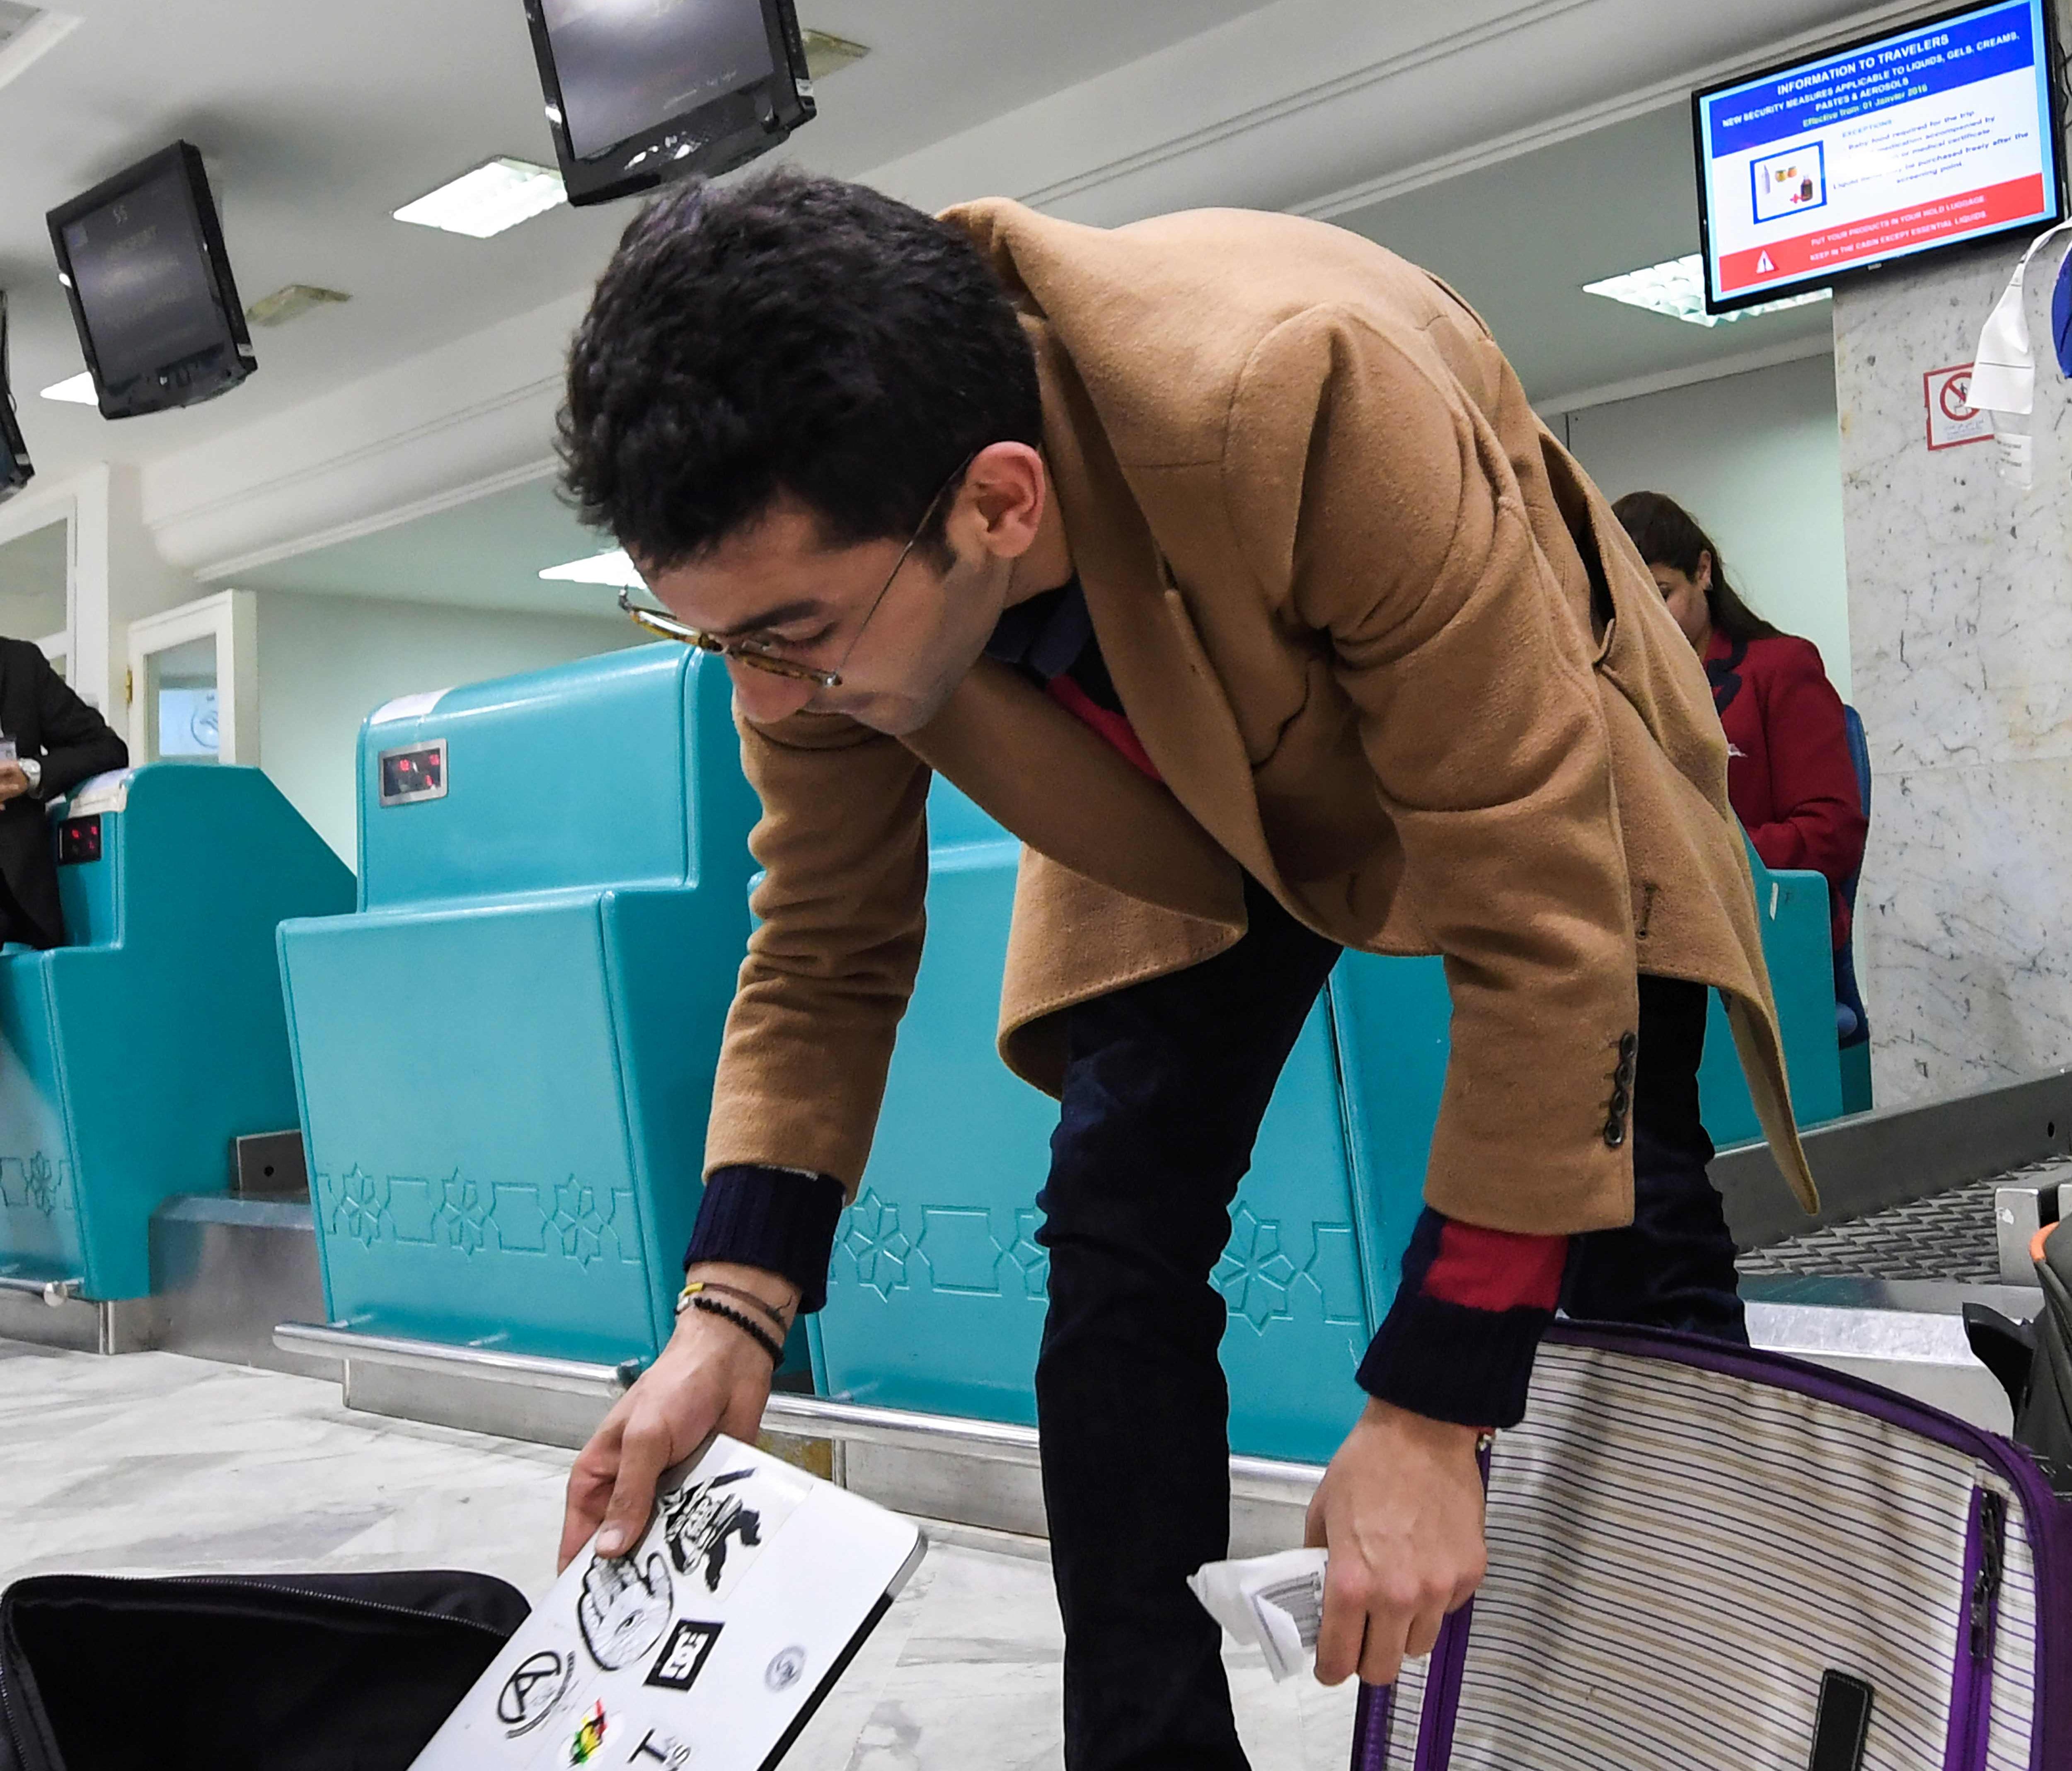 A Libyan traveller packs his laptop in his suitcase before boarding his flight for London from Tunisia.